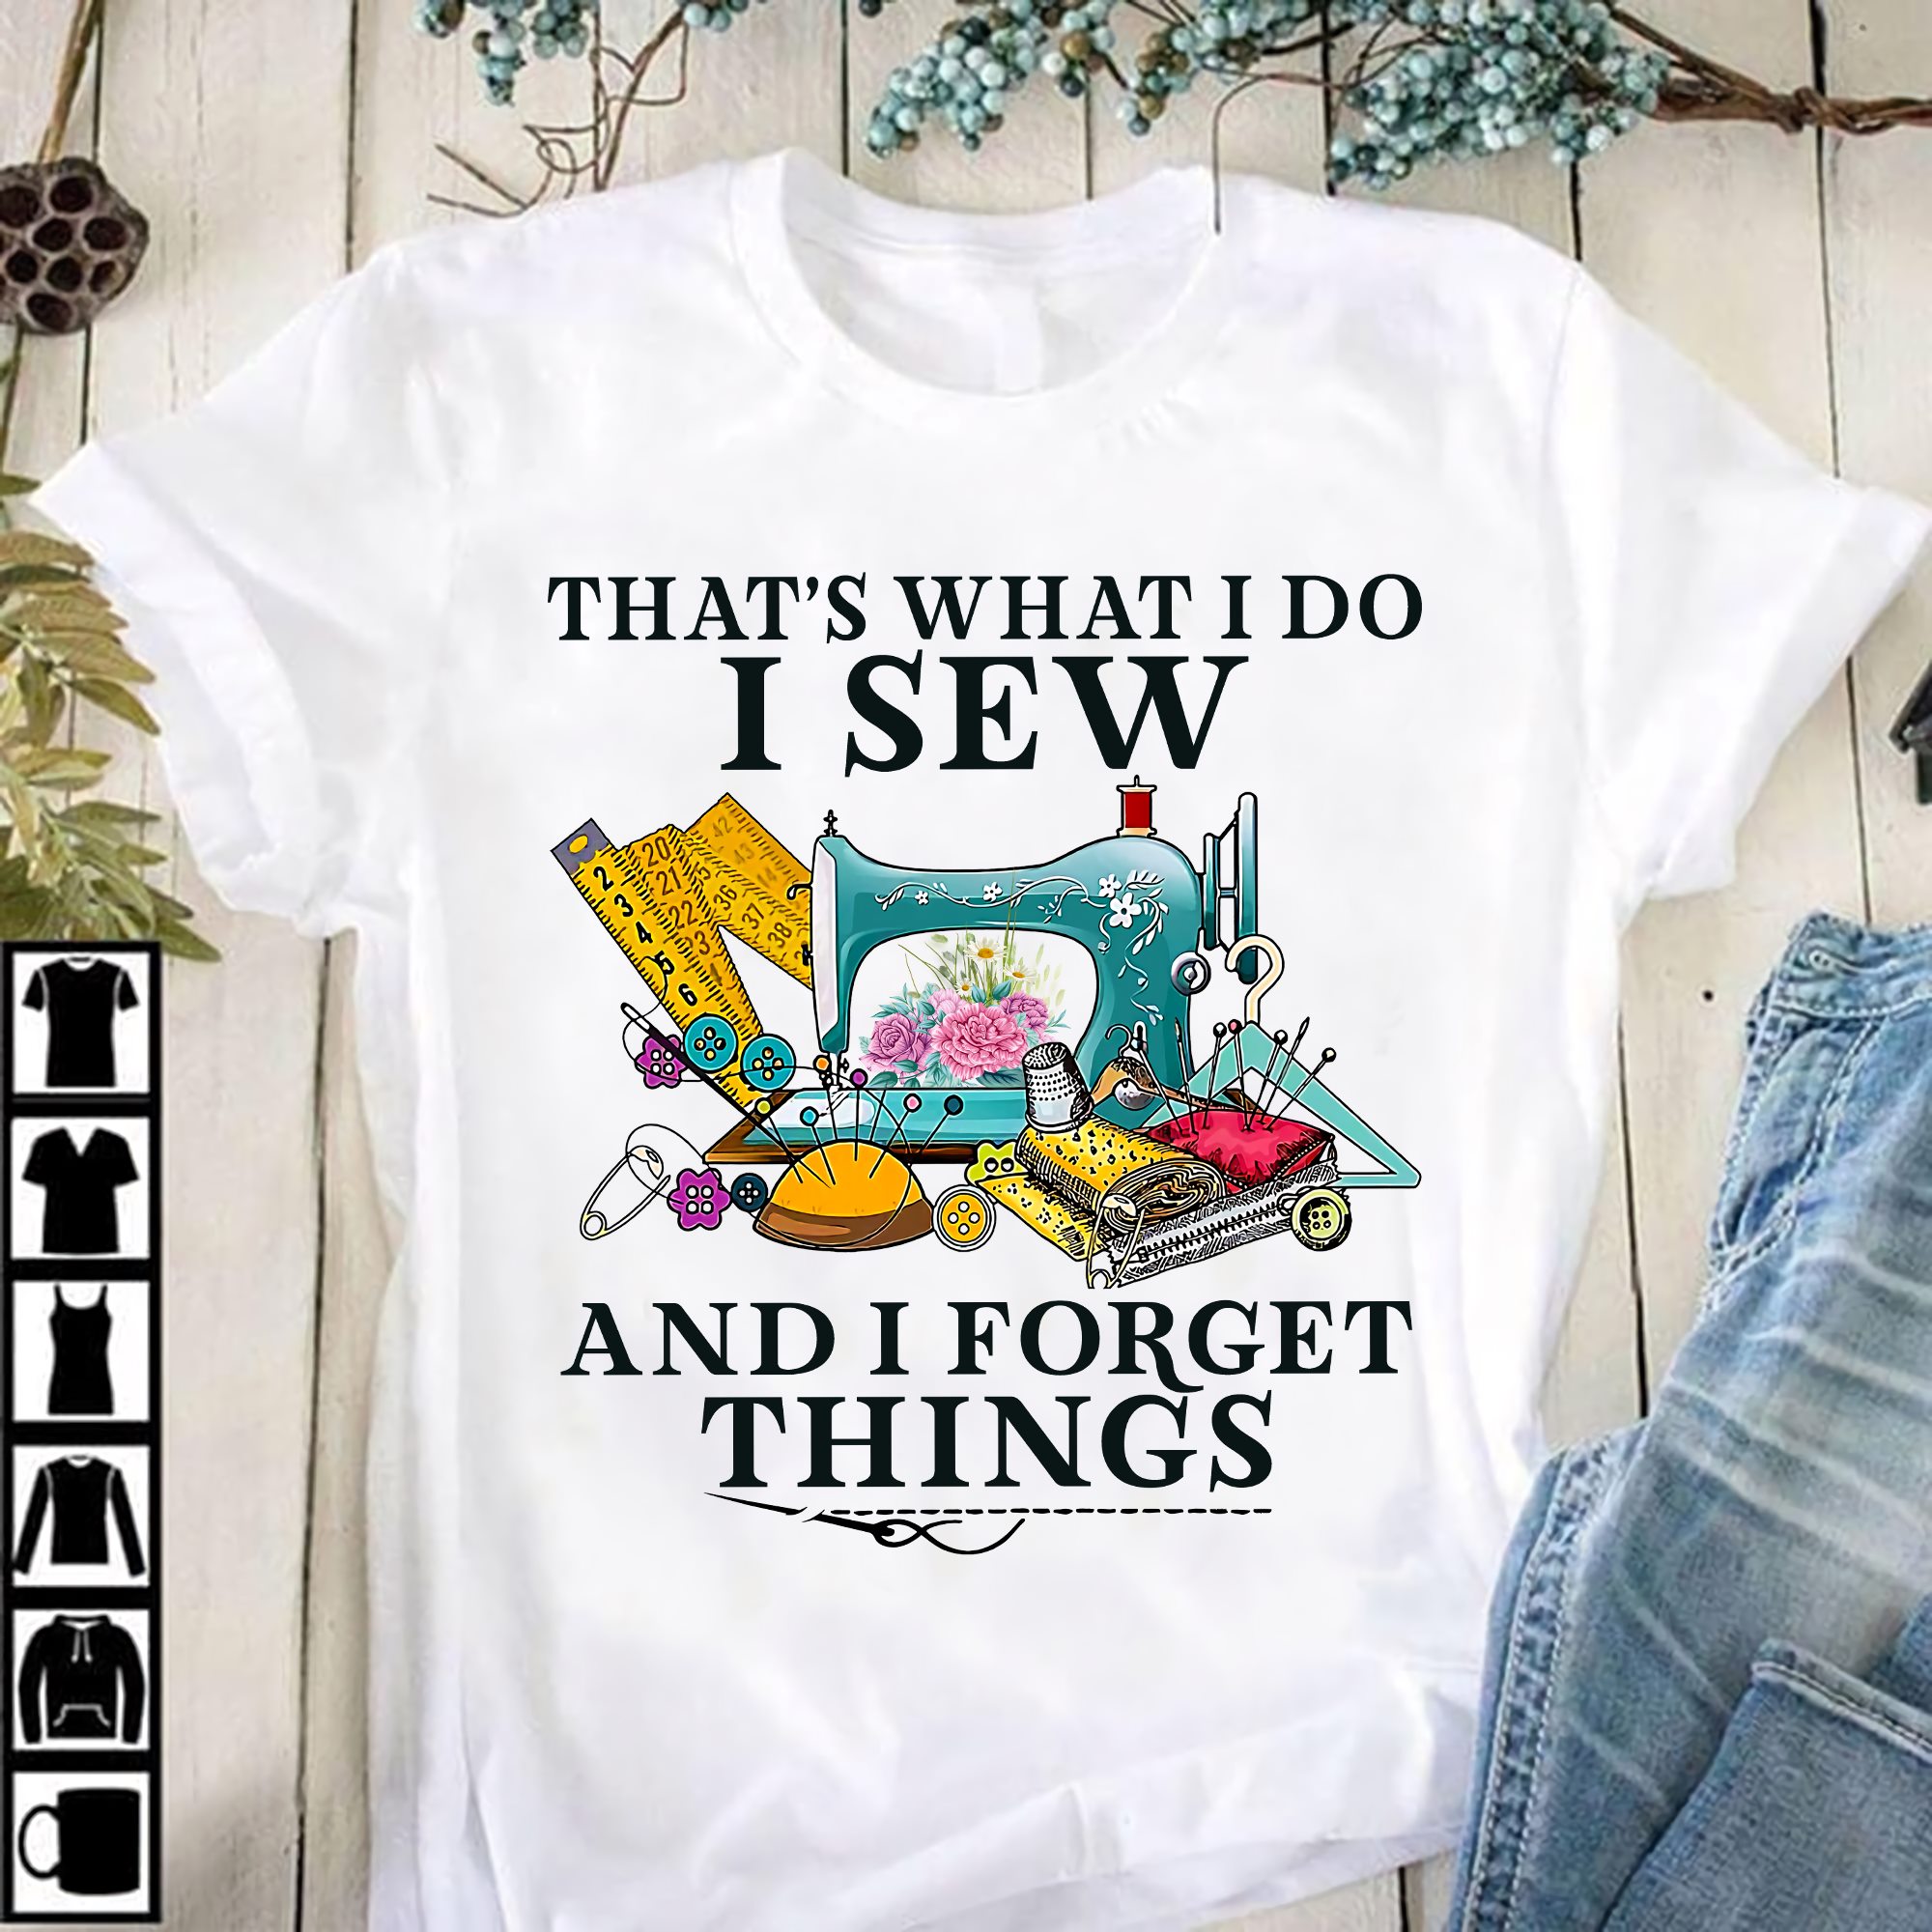 That's what I do I sew and I forget things